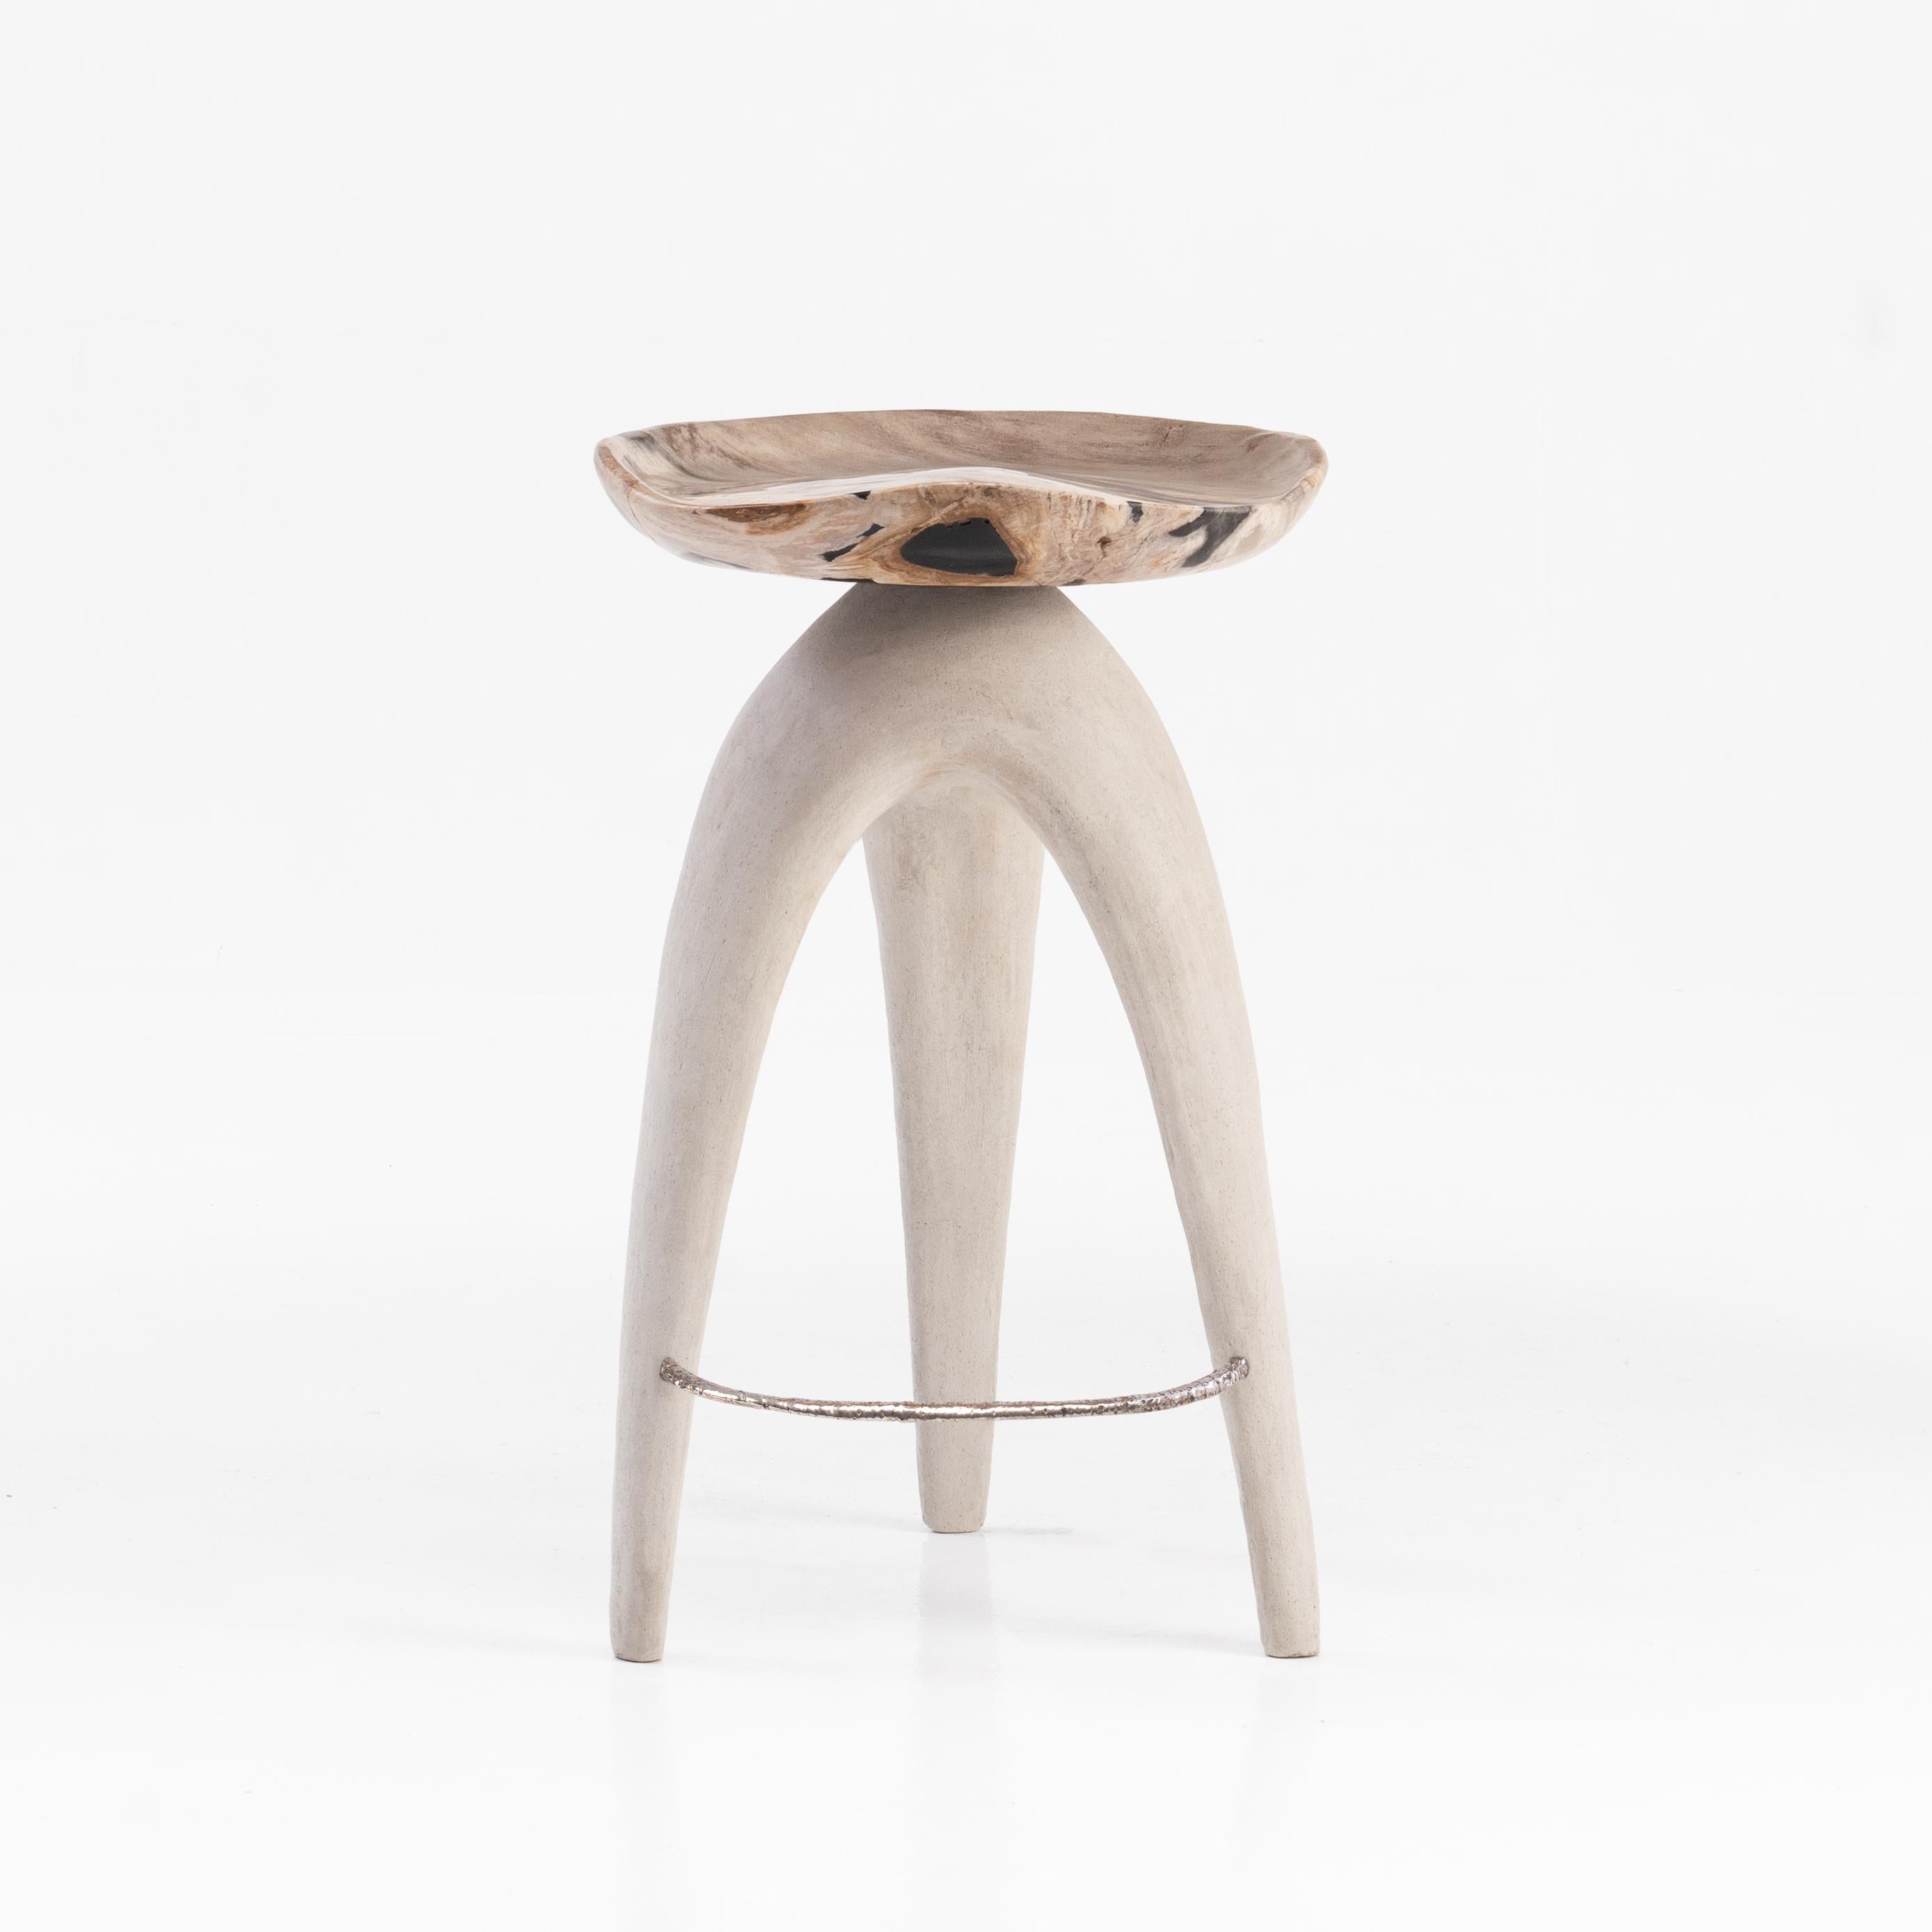 The ‘Bermuda Love Triangle’ sculptural stool features a solid hand-carved petrified wood saddle seat, perched upon an organic shaped tripod base made from limestone composite.
 
Petrified wood is created from fossilised trees transformed into stone